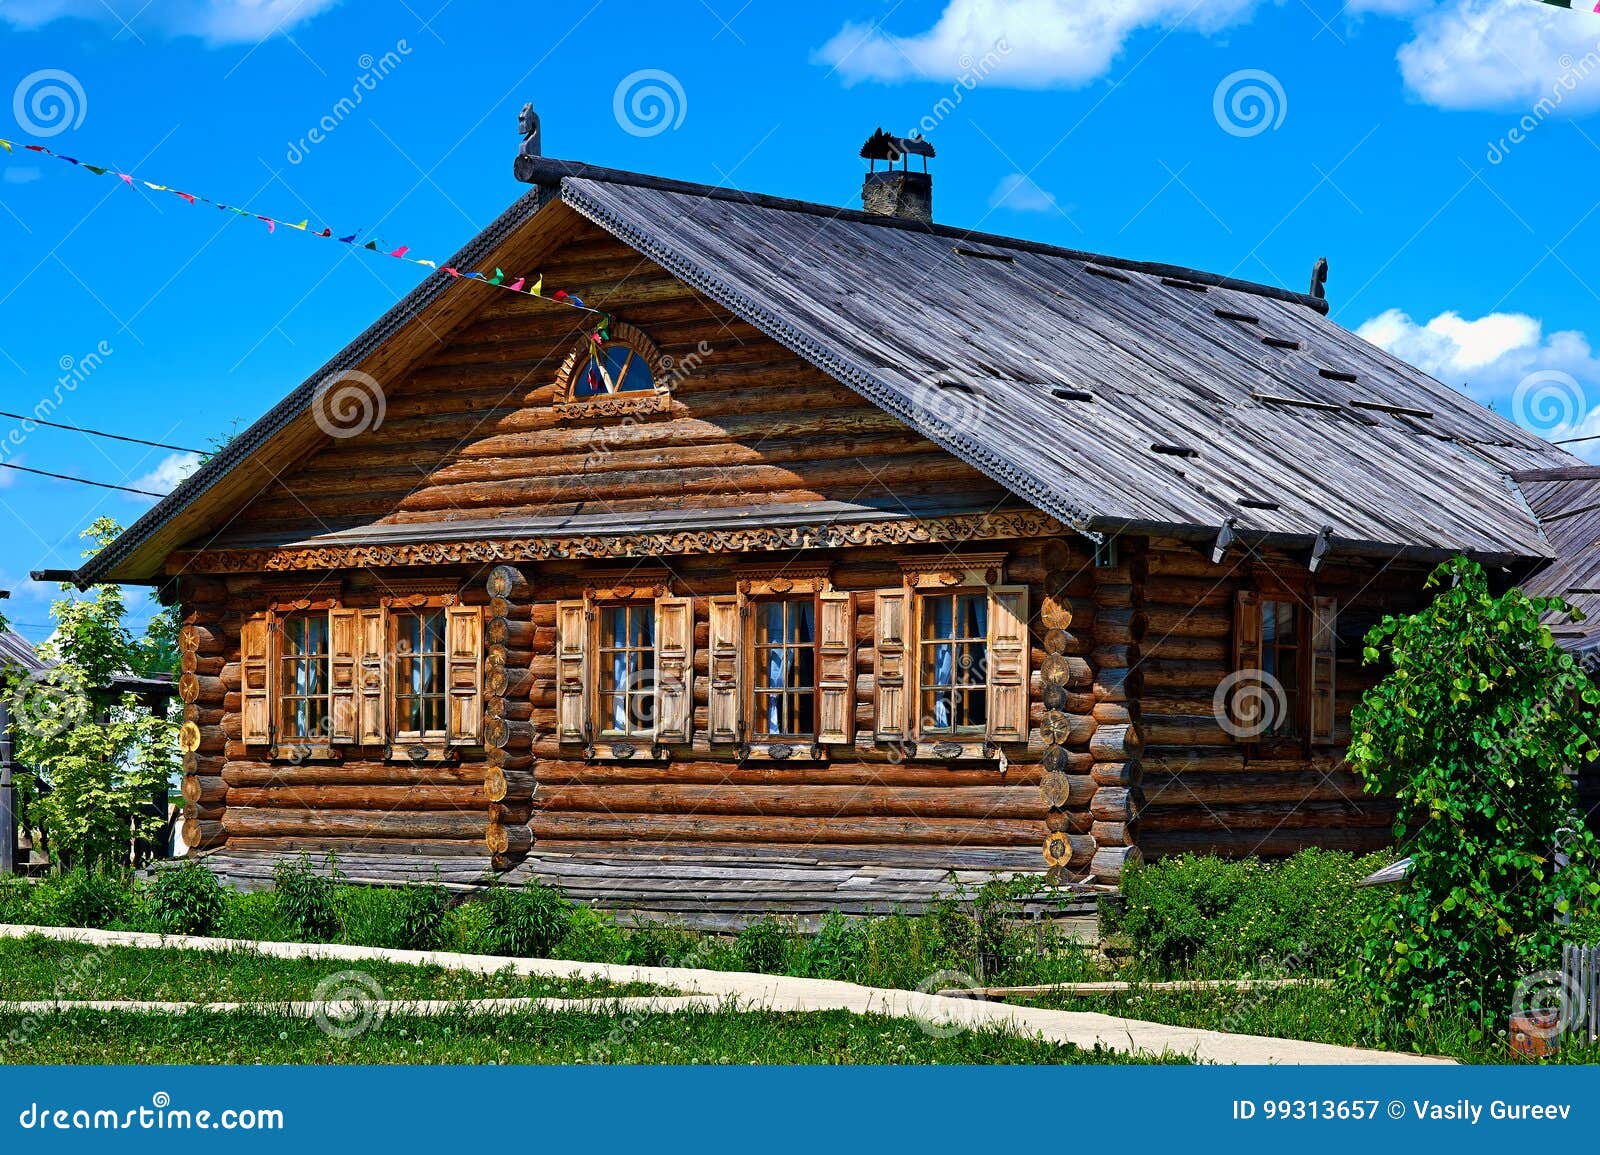 traditional russian house named izba.